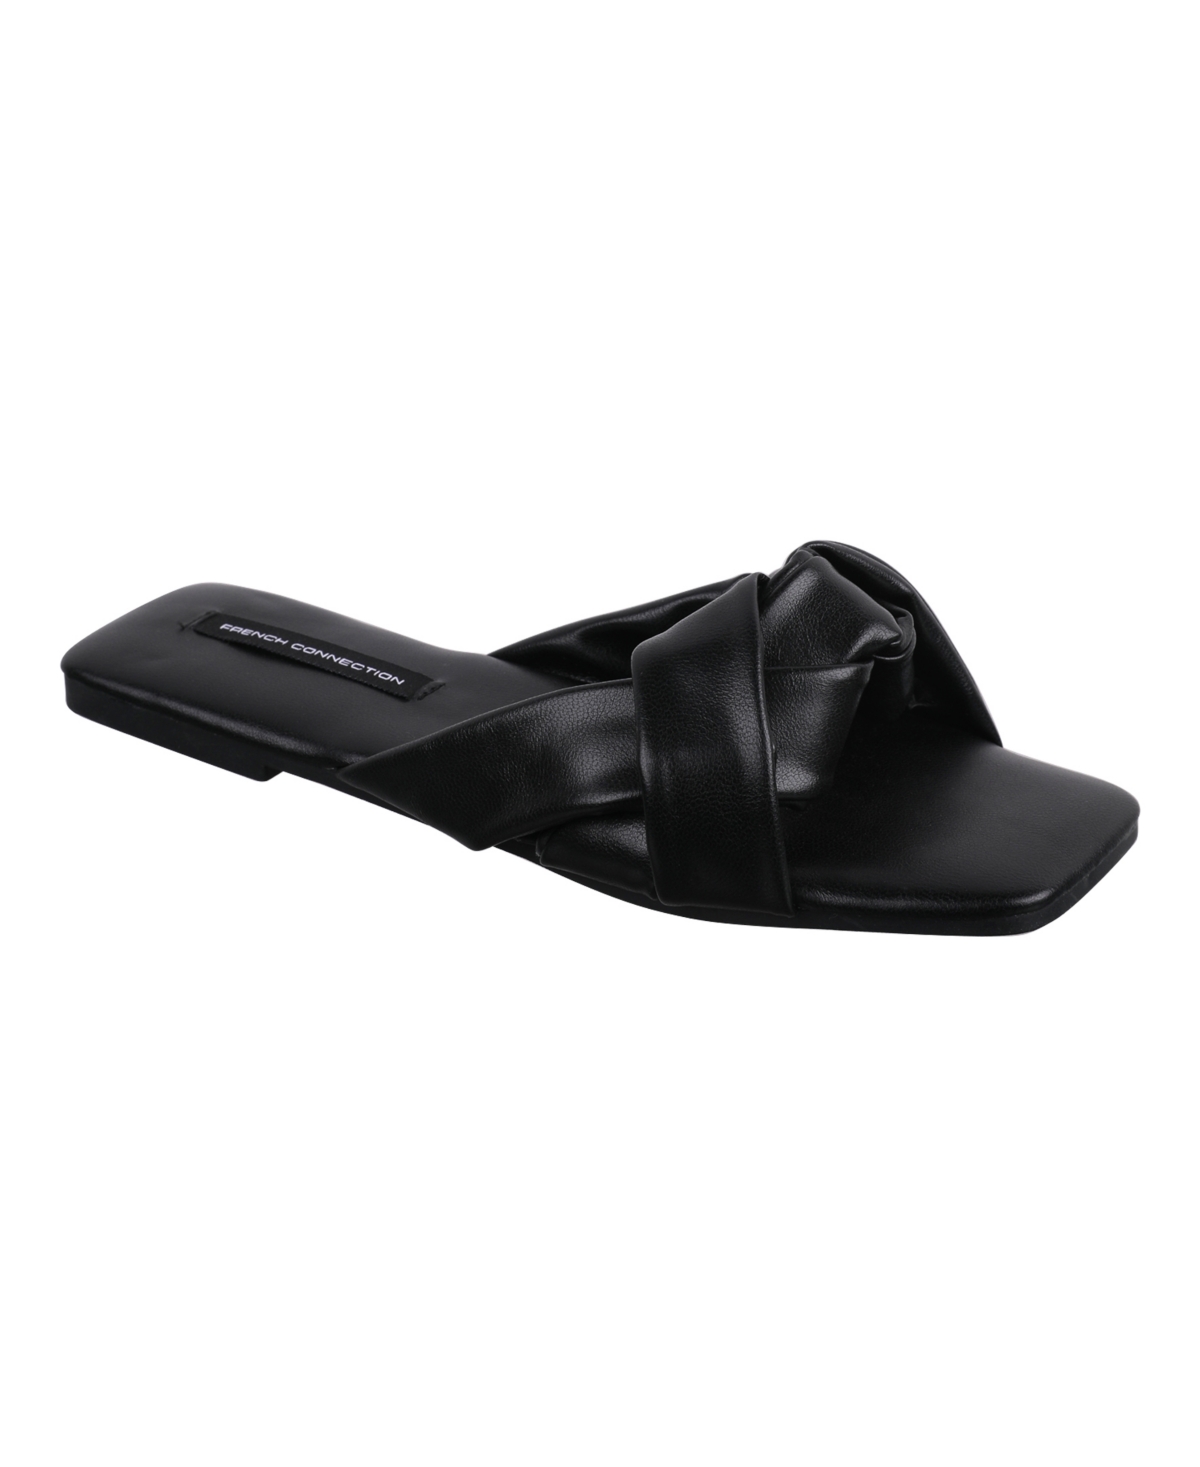 FRENCH CONNECTION WOMEN'S DRIVER FLAT SANDALS